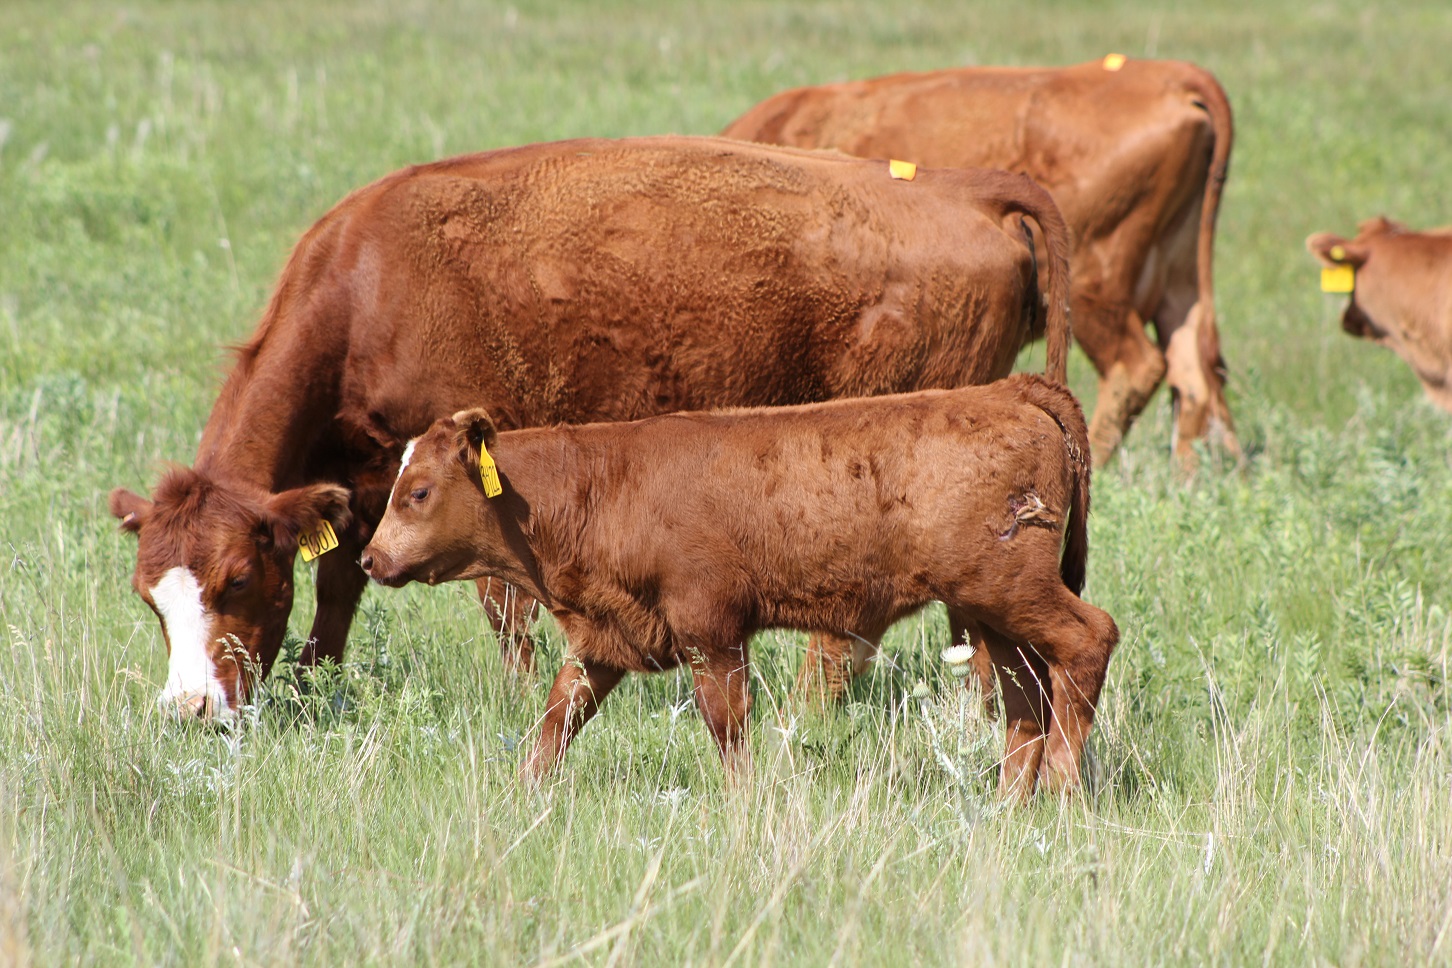 Estrus synchronization can lead to an increased proportion of females conceiving earlier in the calving season and will wean older and larger calves at weaning.  Photo courtesy of Troy Walz.